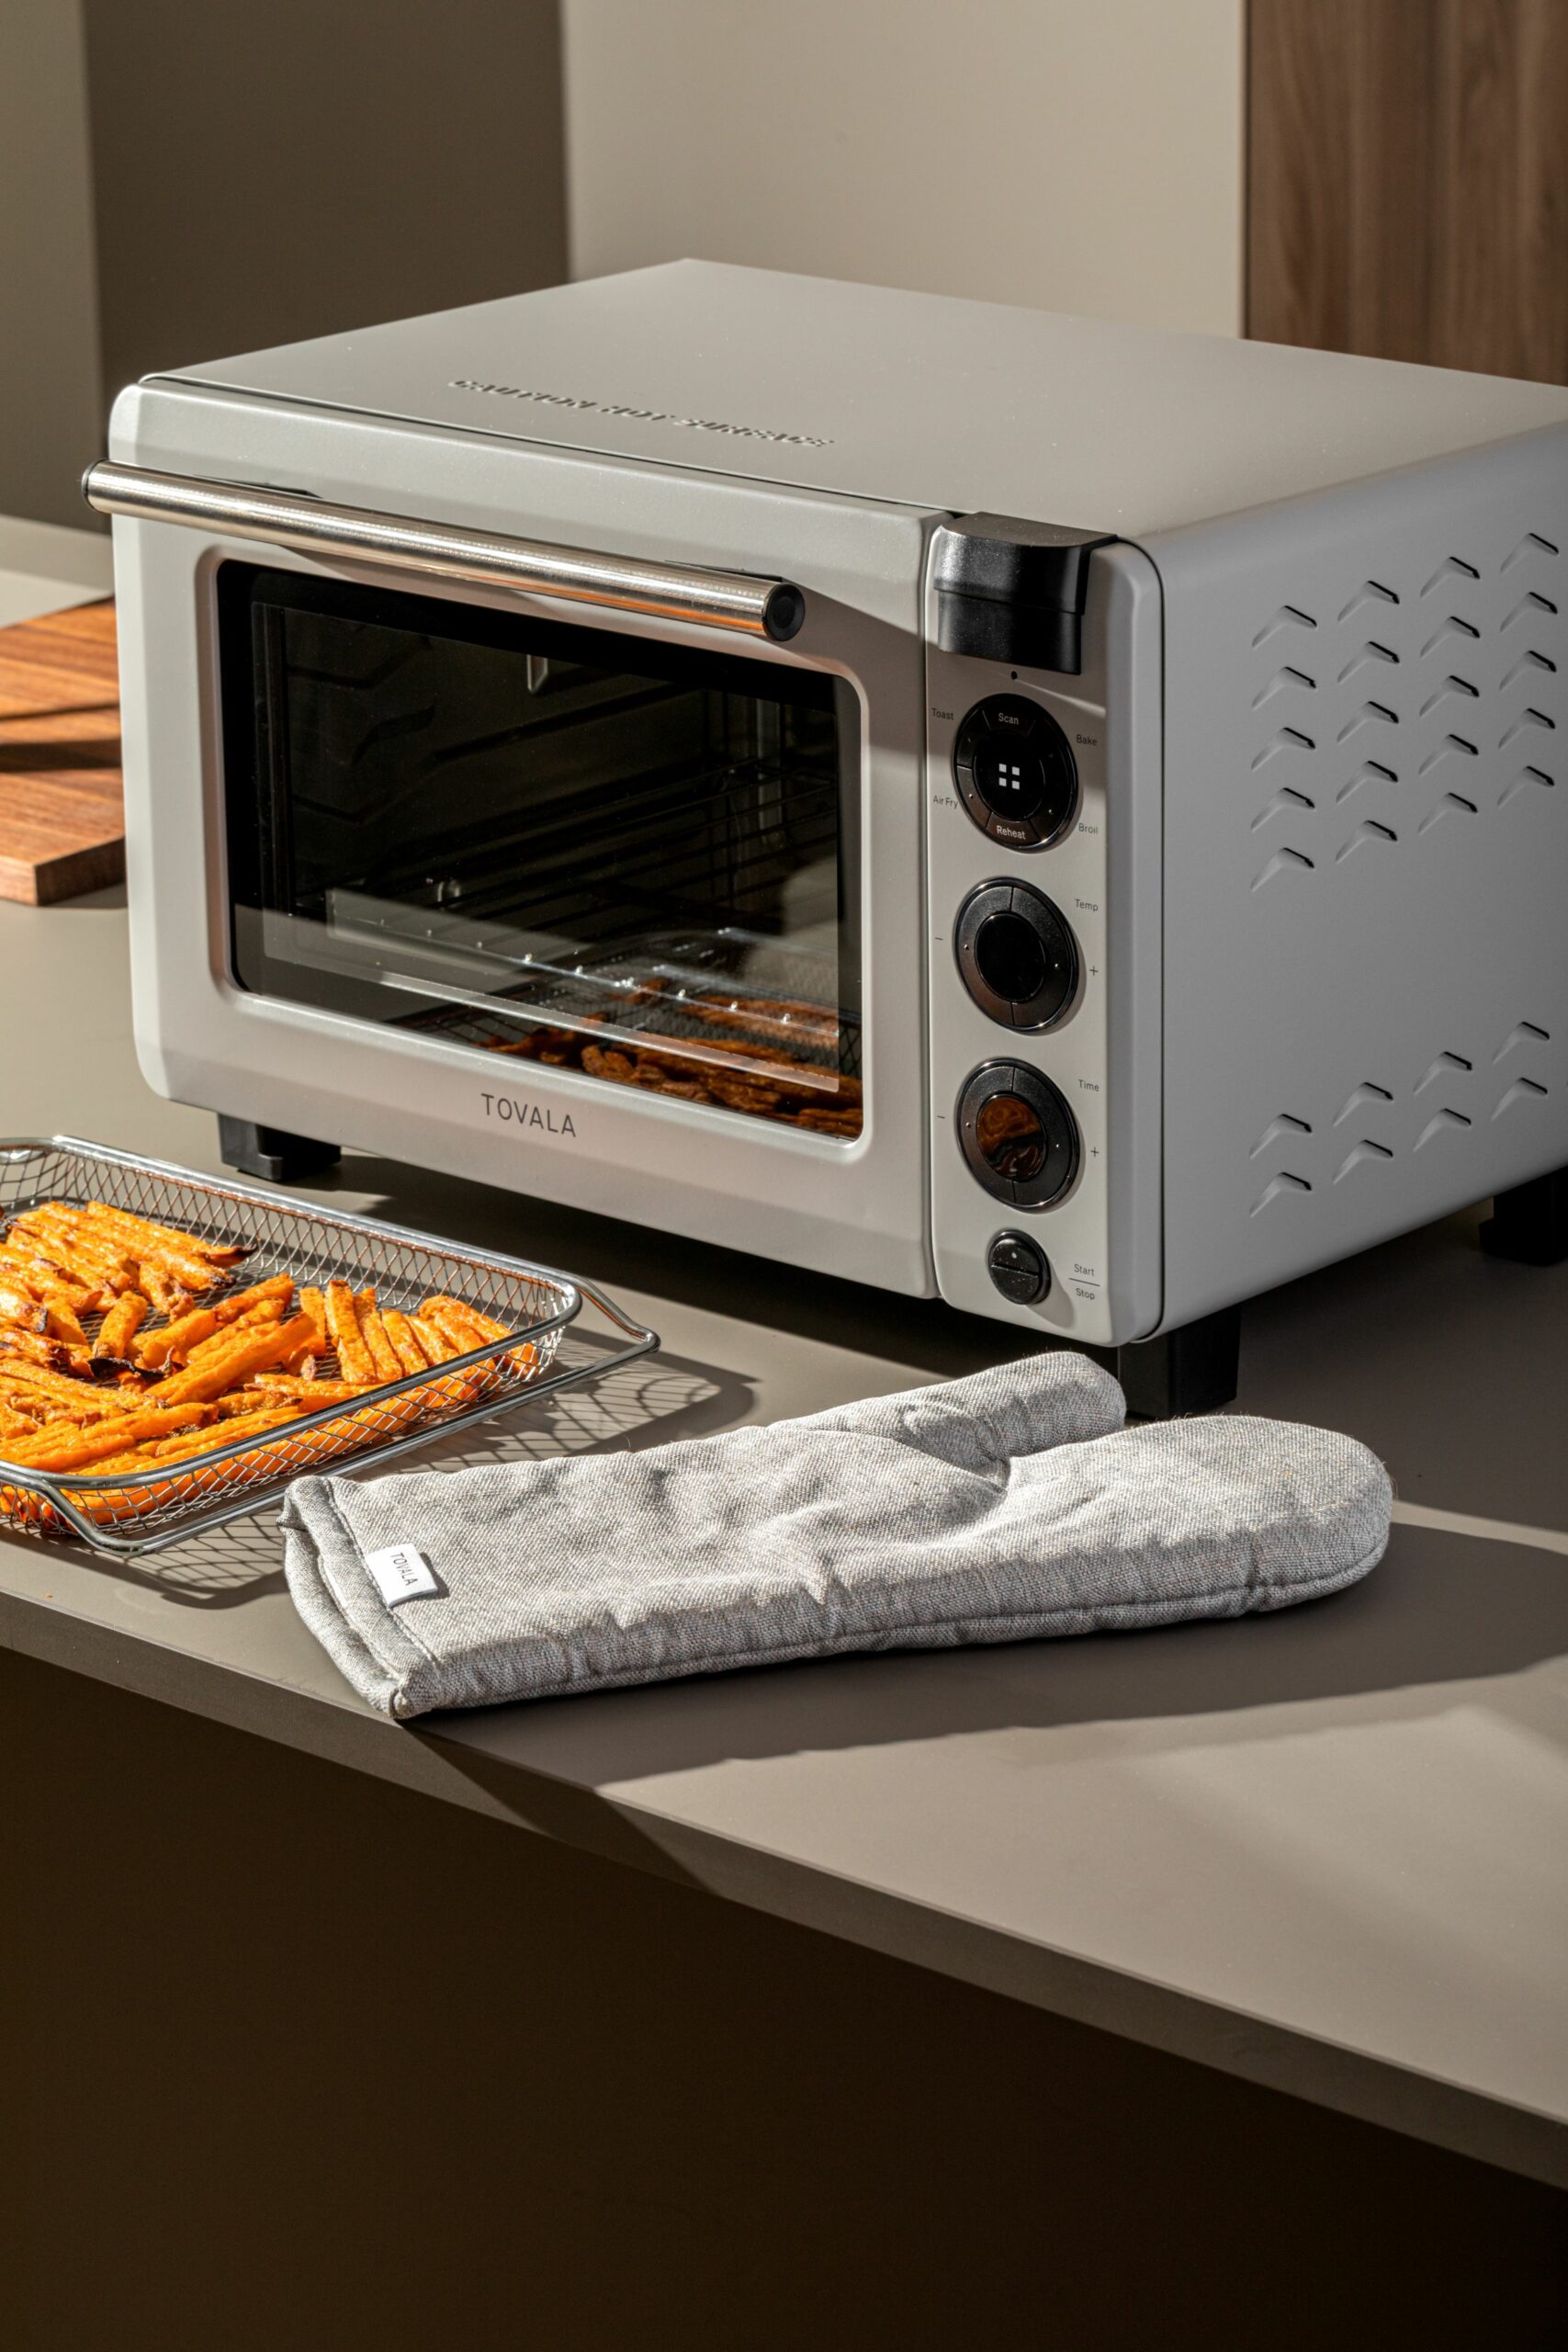 AHEAD OF VALENTINE'S DAY, TOVALA IS OFFERING FREE SMART OVENS FOR THOSE  GOING THROUGH A FRESH BREAKUP